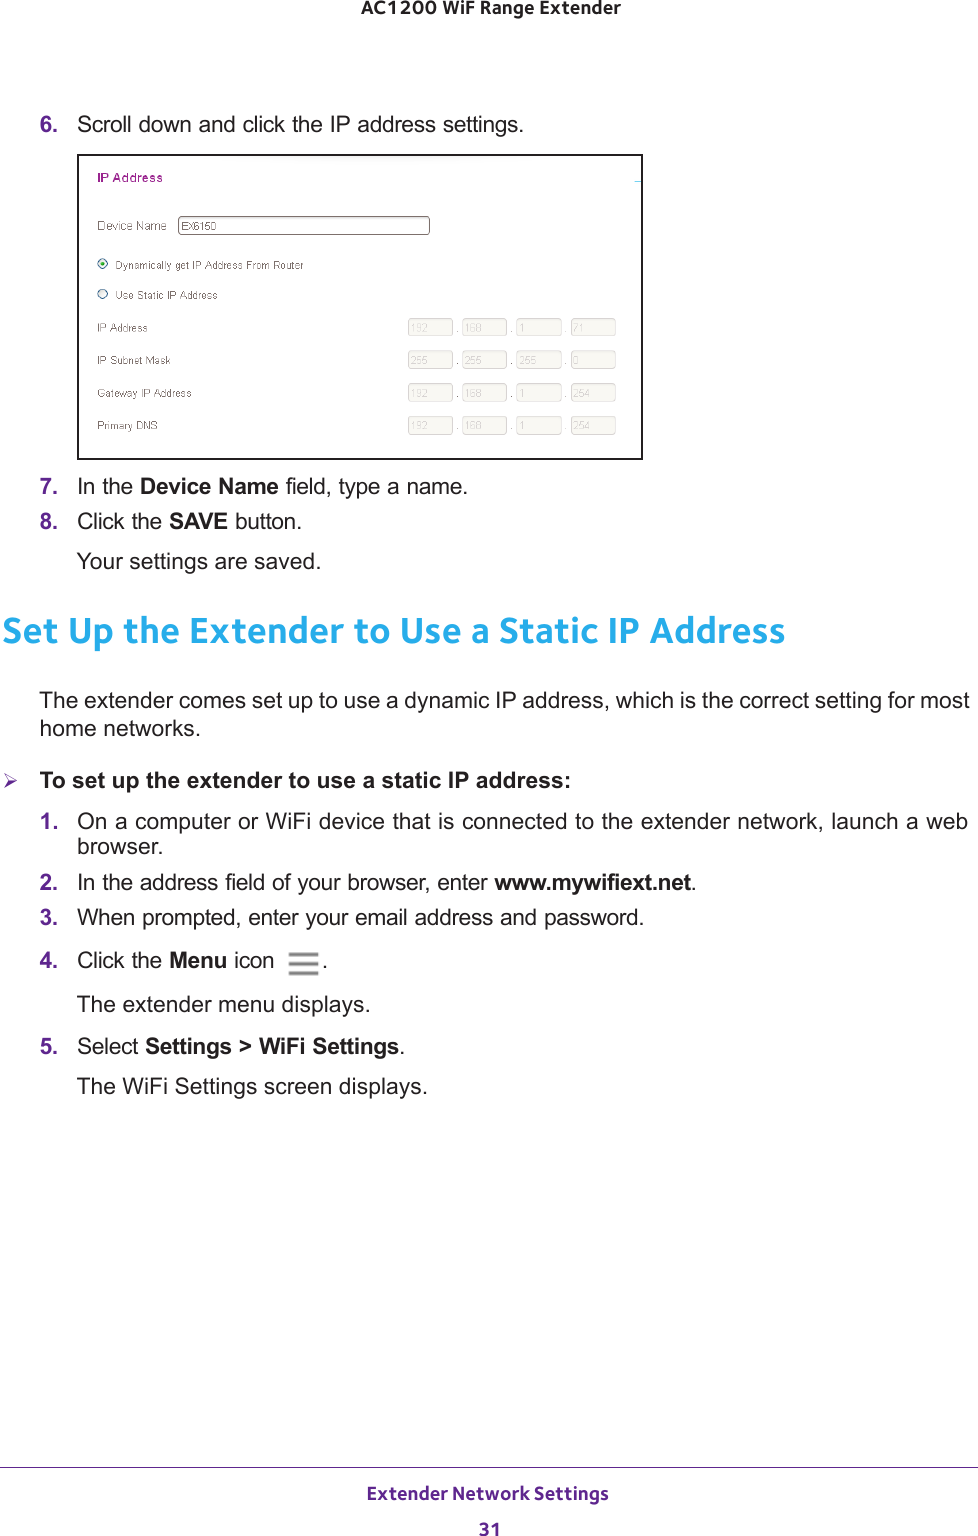 Extender Network Settings 31 AC1200 WiF Range Extender6.  Scroll down and click the IP address settings.7.  In the Device Name field, type a name.8.  Click the SAVE button.Your settings are saved.Set Up the Extender to Use a Static IP AddressThe extender comes set up to use a dynamic IP address, which is the correct setting for most home networks. To set up the extender to use a static IP address:1.  On a computer or WiFi device that is connected to the extender network, launch a web browser. 2.  In the address field of your browser, enter www.mywifiext.net. 3.  When prompted, enter your email address and password.4.  Click the Menu icon  .The extender menu displays.5.  Select Settings &gt; WiFi Settings.The WiFi Settings screen displays.